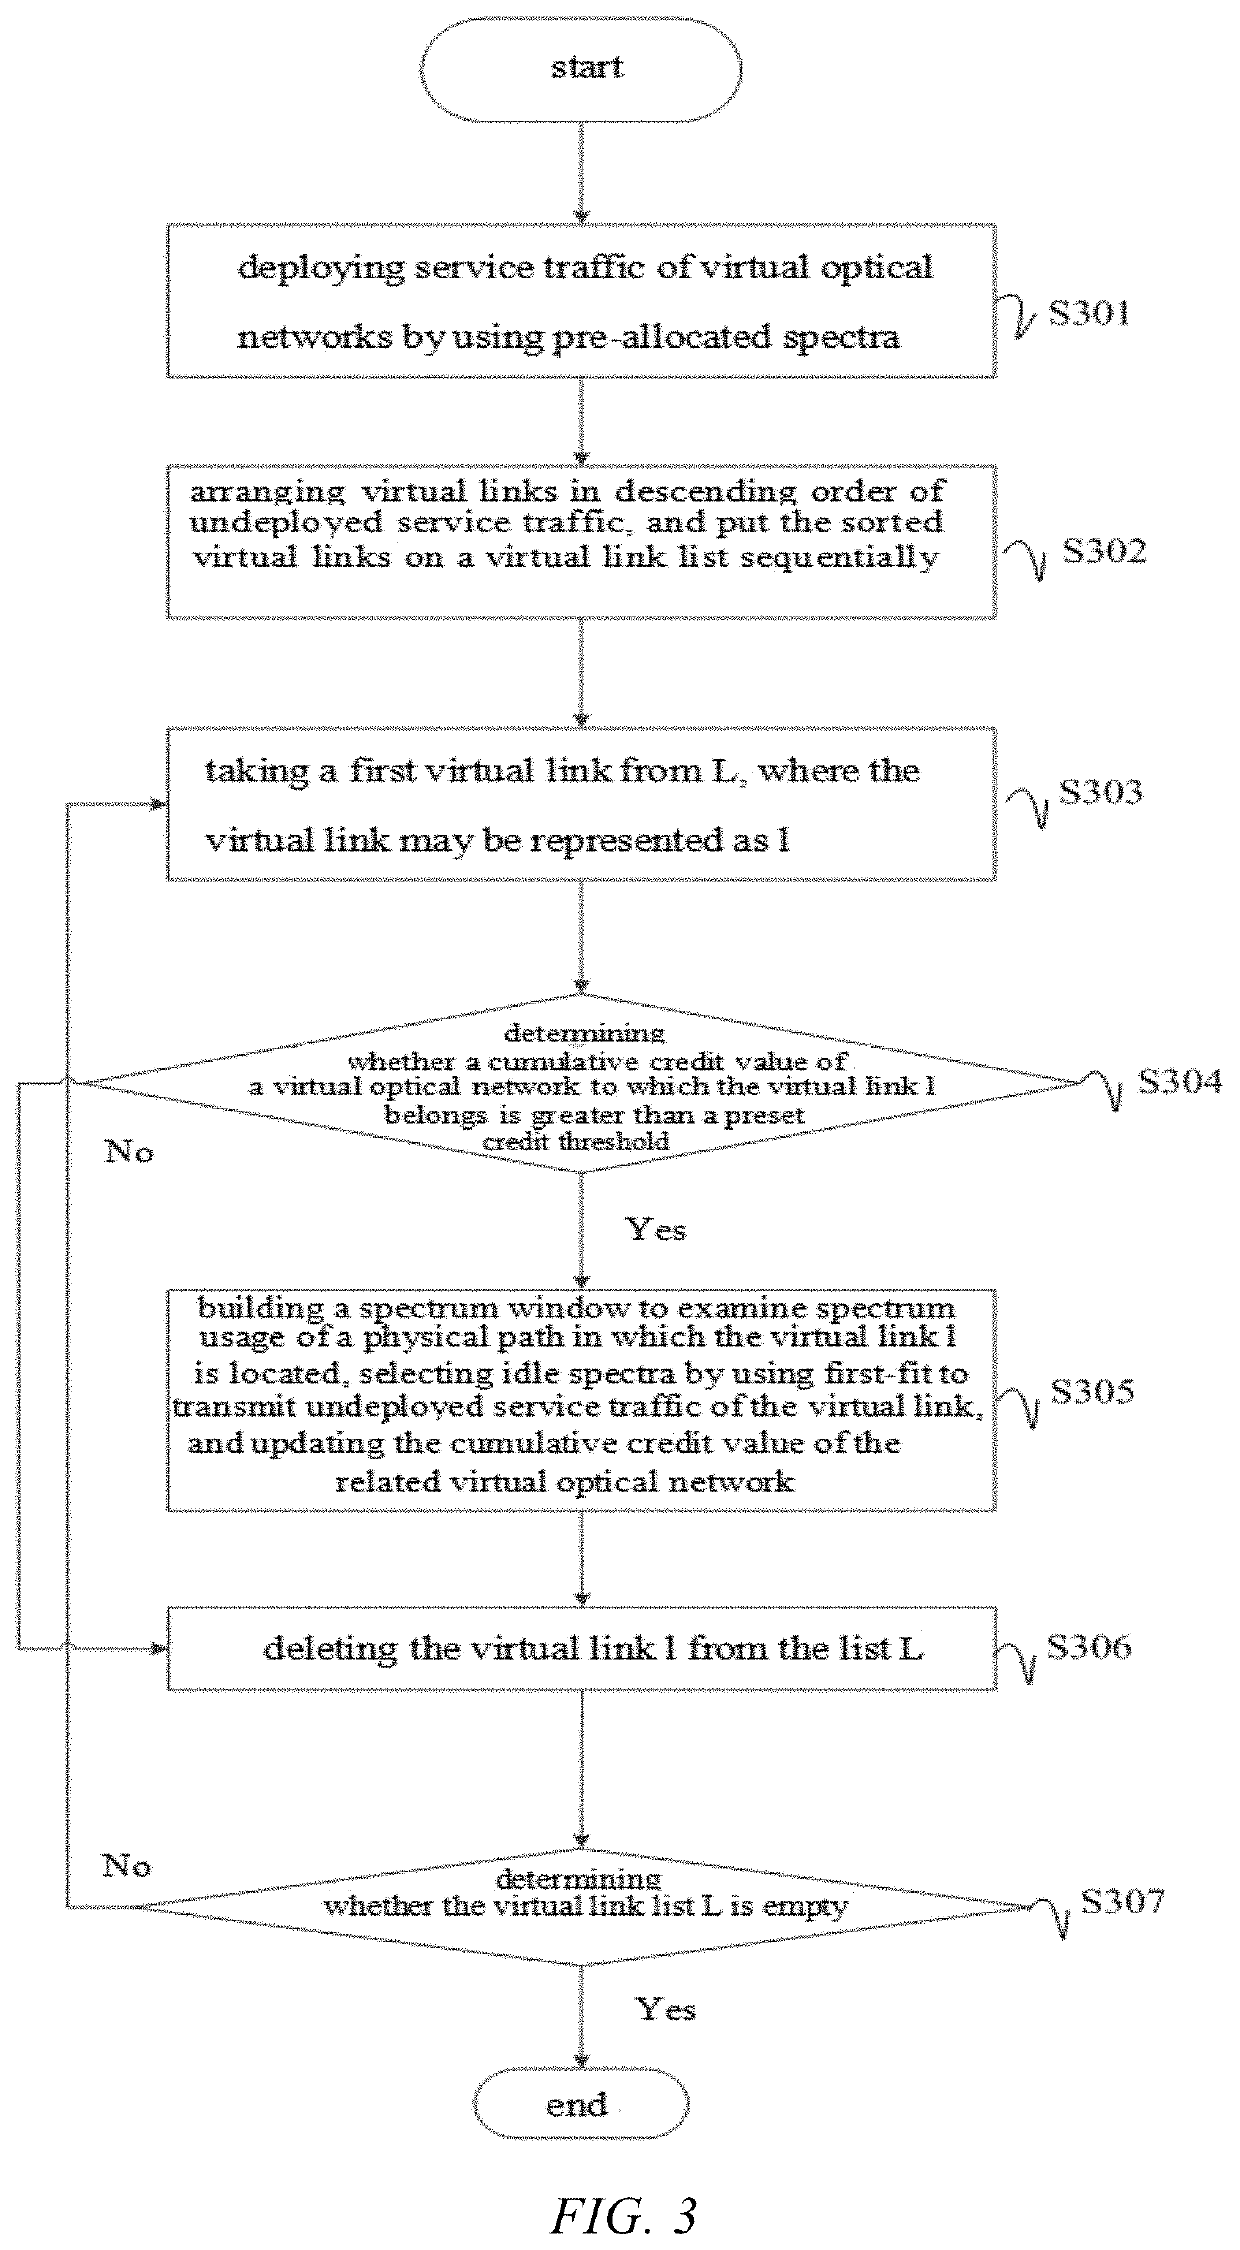 Virtual optical network-oriented spectrum resource trading method and system